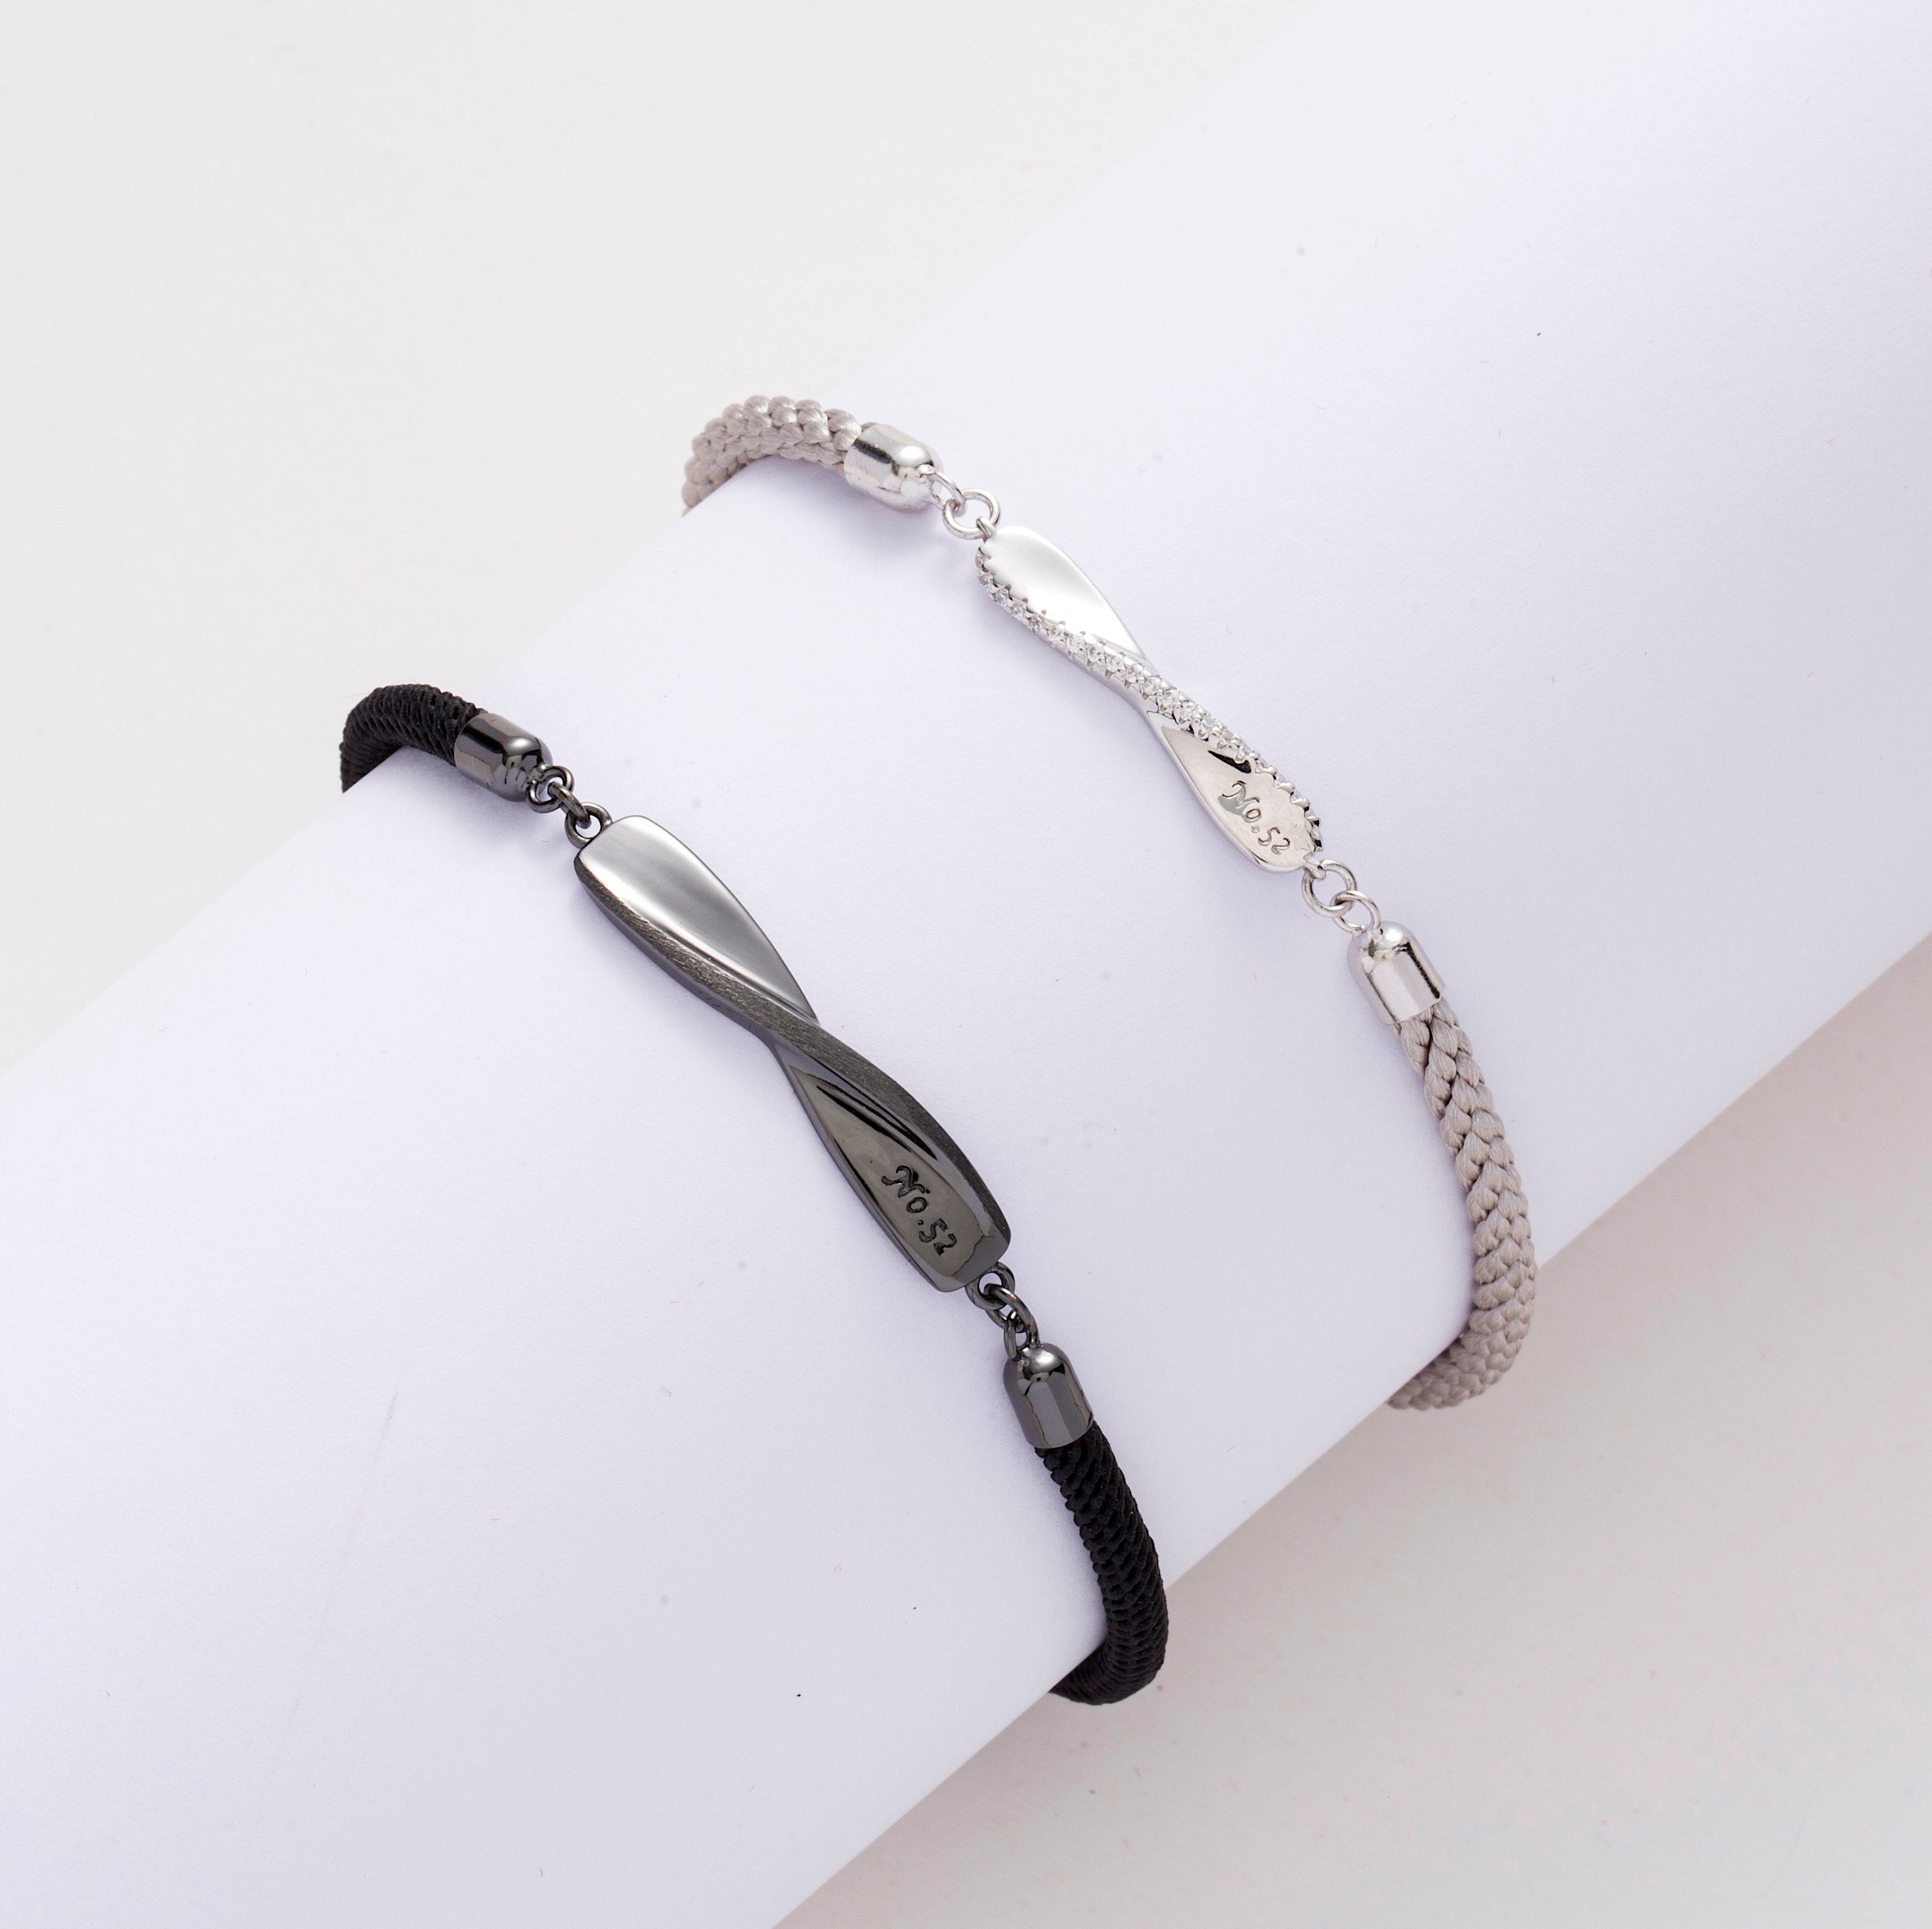 Silver Lockit Beads Bracelet, Silver and Black Polyester Cord - Jewelry -  Categories | LOUIS VUITTON ®